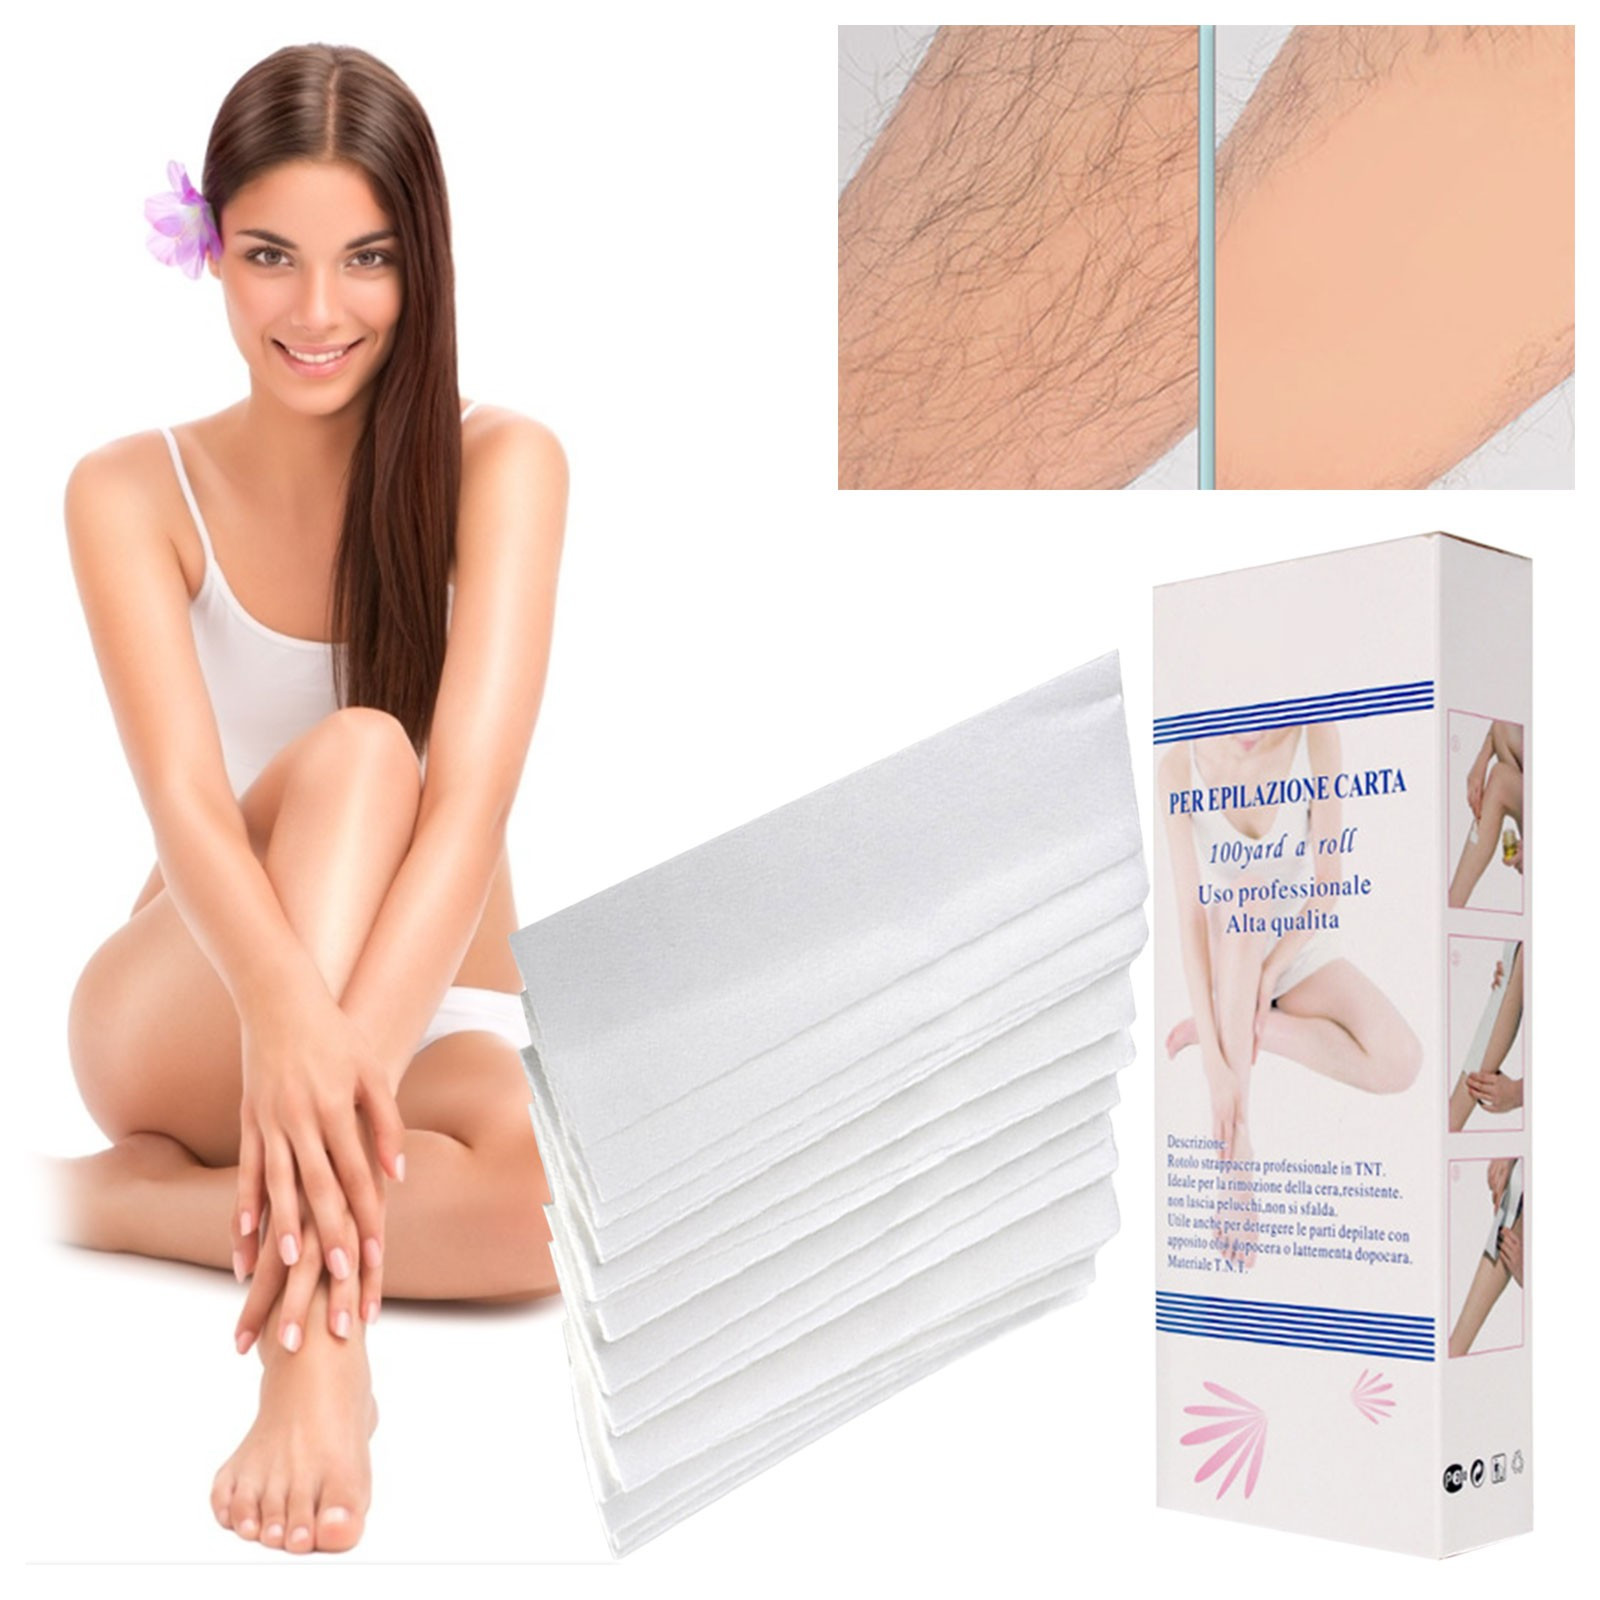 HSMQHJWE European Wax Beads for Hair Removal Nonwoven Waxing Strips 100  Piece Hair Removal Wax Paper Strips For Facial Body Leg Eyebrow Epilating  Depilatory Paper Hair Removal Tool Hard Wax Microwave 